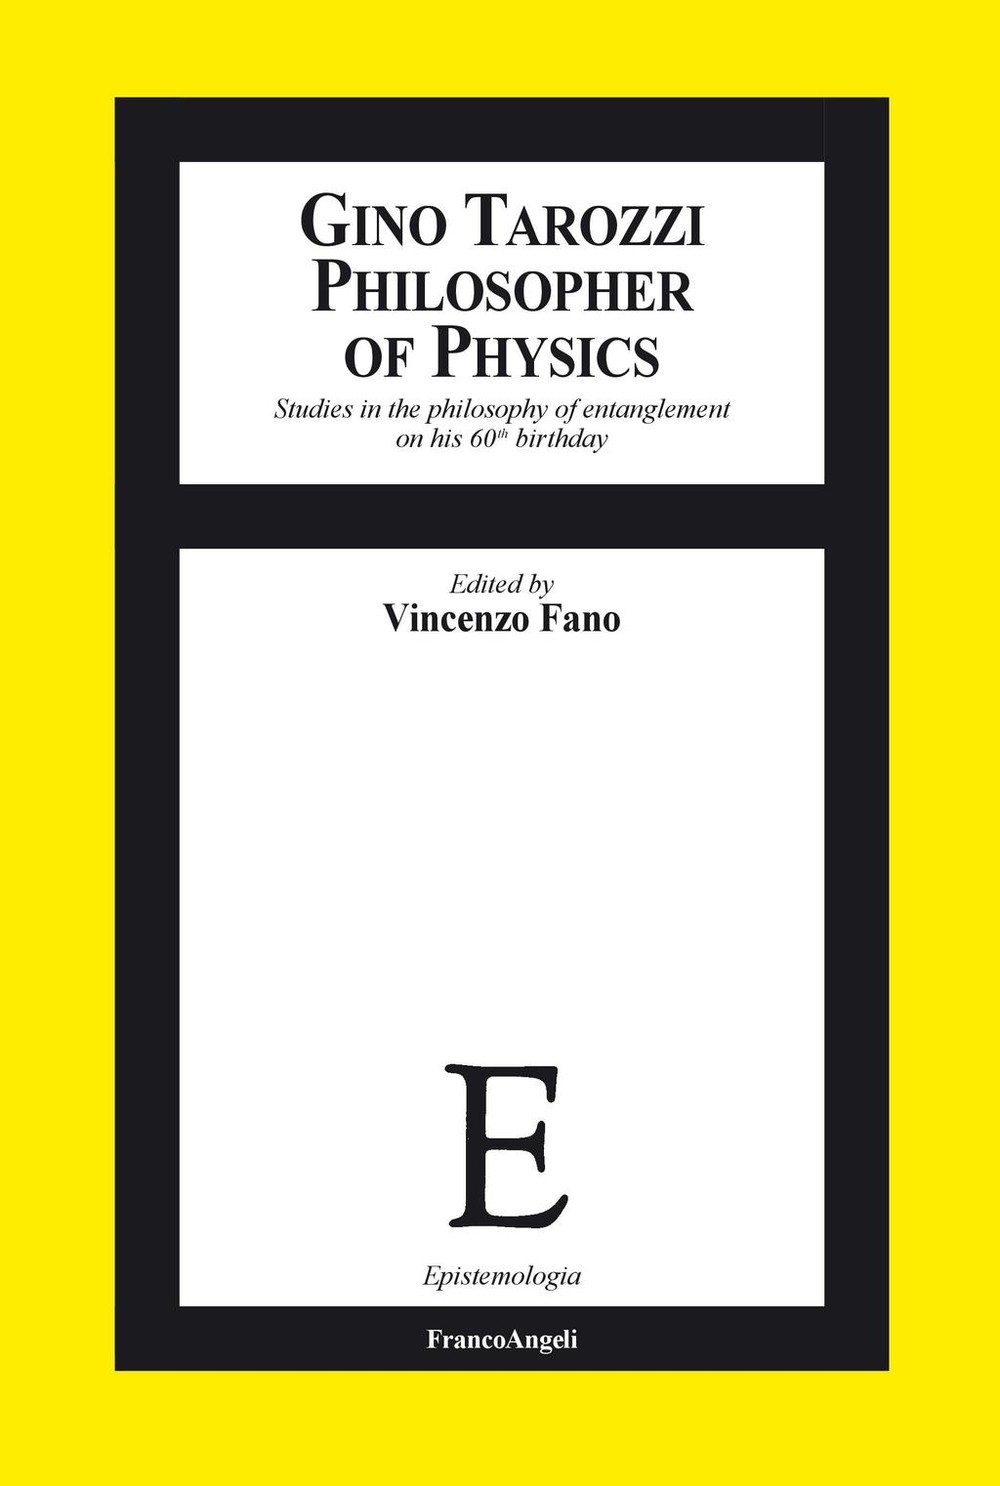 Gino Tarozzi Philosopher of Physics. Studies in the philosophy of entanglement on his 60th birthday - Librerie.coop